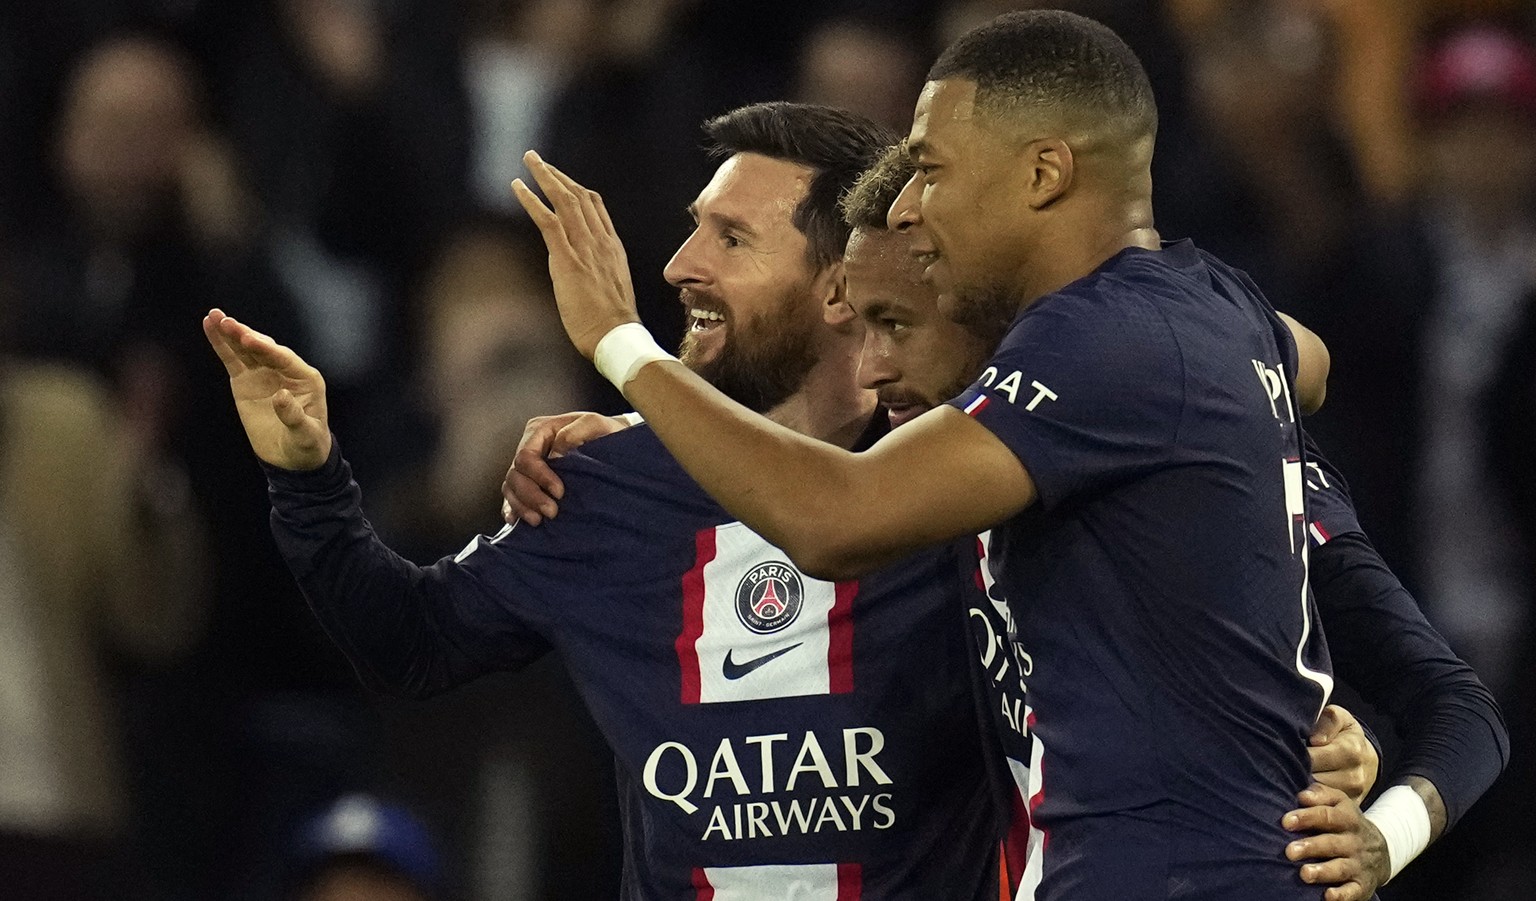 PSG&#039;s Neymar, center, celebrates PSG&#039;s Lionel Messi, left, and PSG&#039;s Kylian Mbappe, right, after scoring his side&#039;s third goal during the Champions League Group H soccer match betw ...